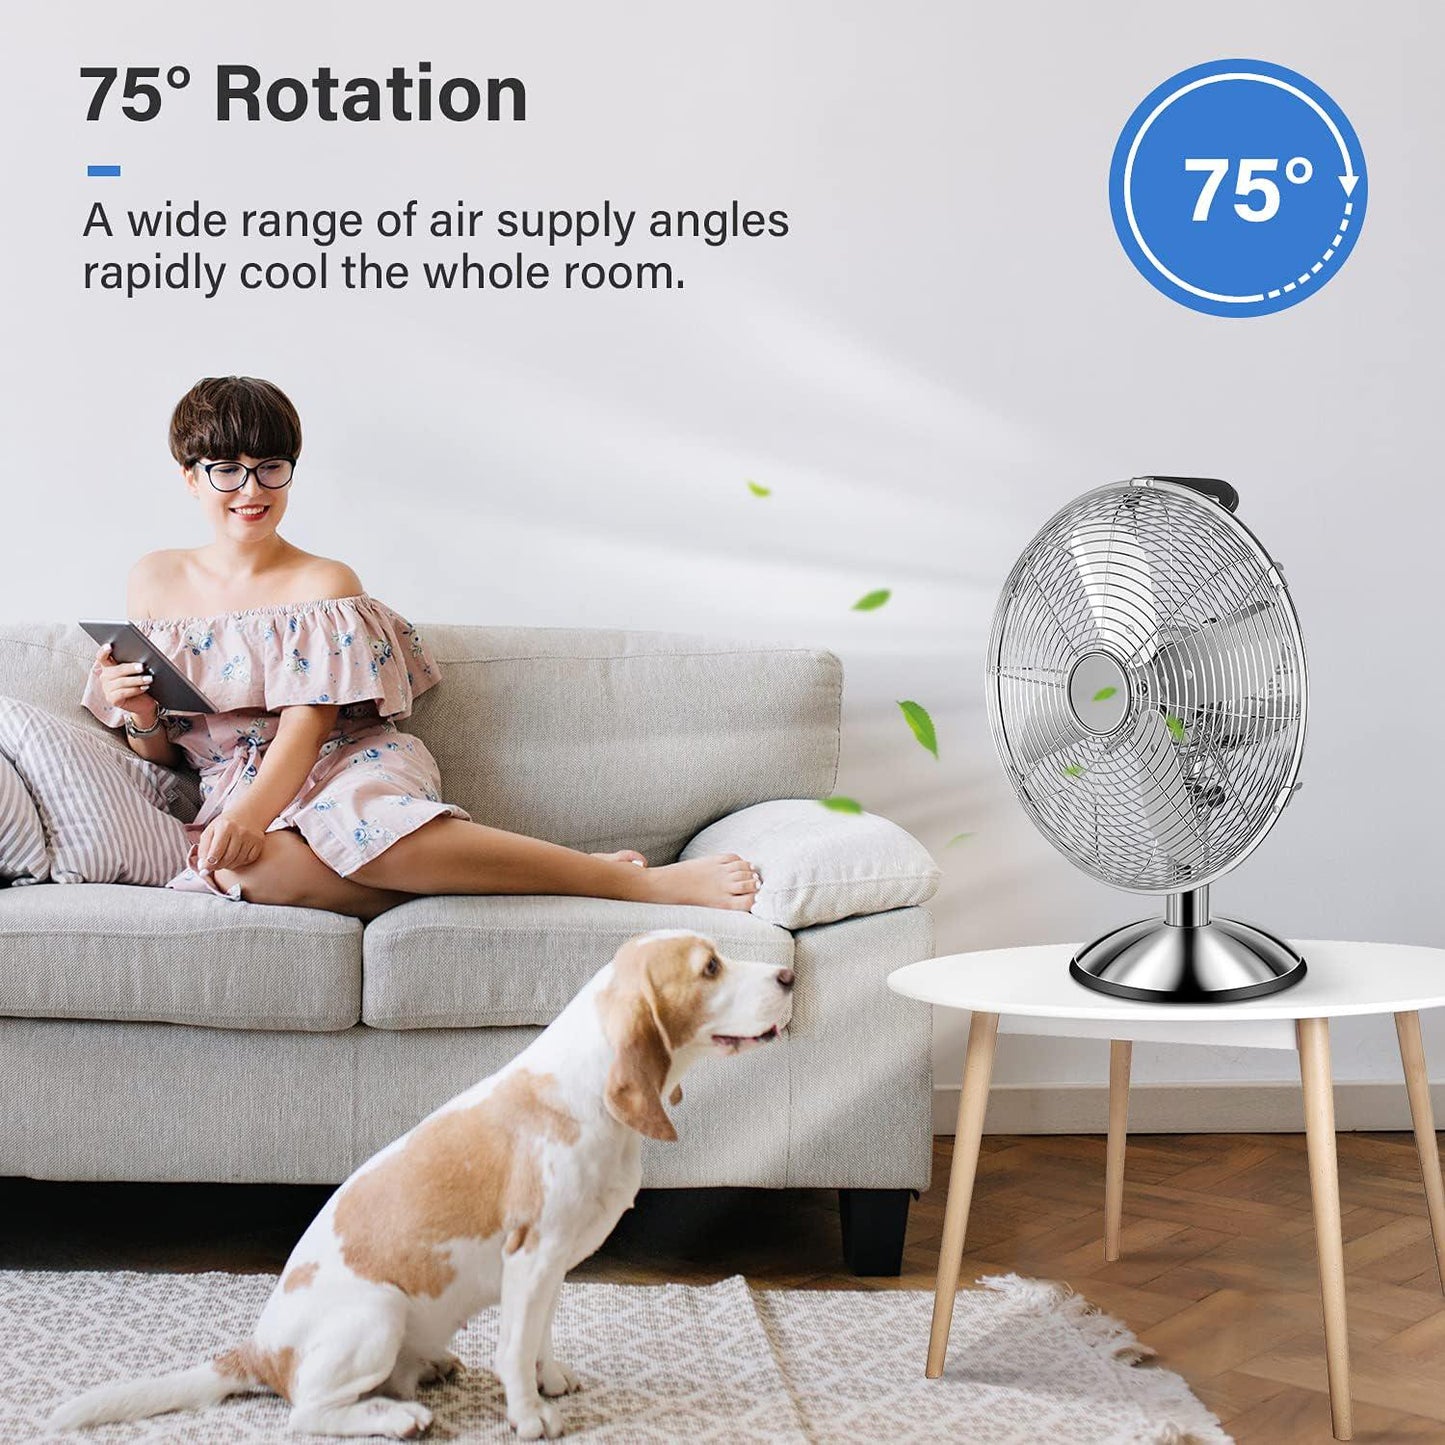 Deluxe 12 Inch Stand Fan, Horizontal Ocillation 75°, 3 Settings Speeds, Low Noise, Quality Made Durable Fan, High Velocity, Heavy Duty Metal For Industrial, Commercial